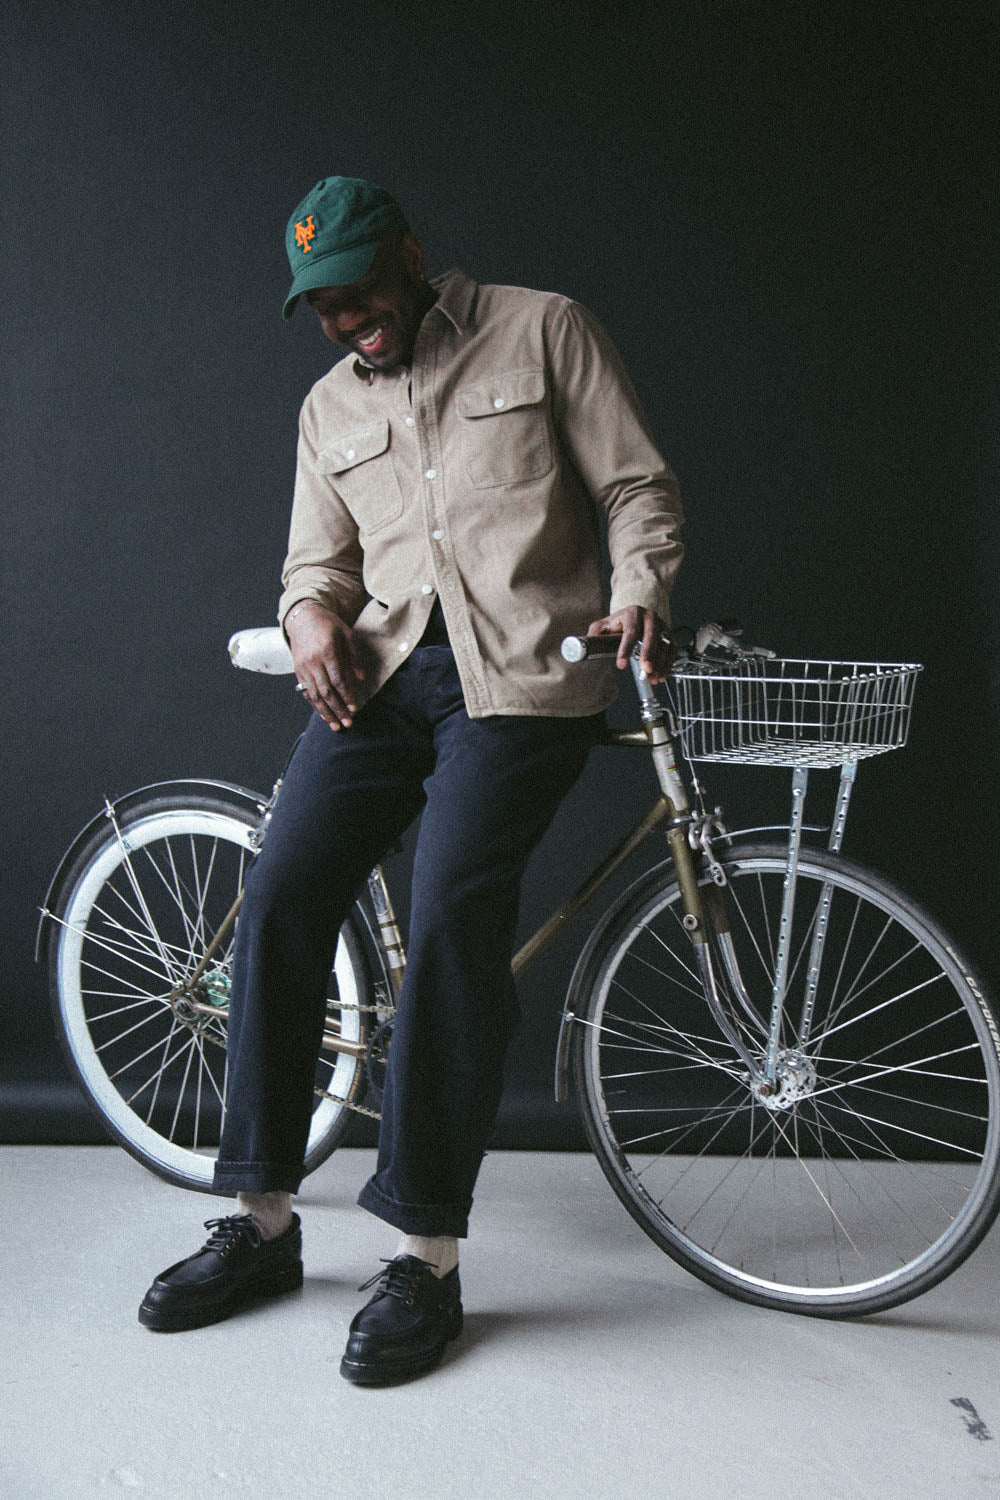 Gallery images of the Men’s French Corduroy Workshirt - Oat